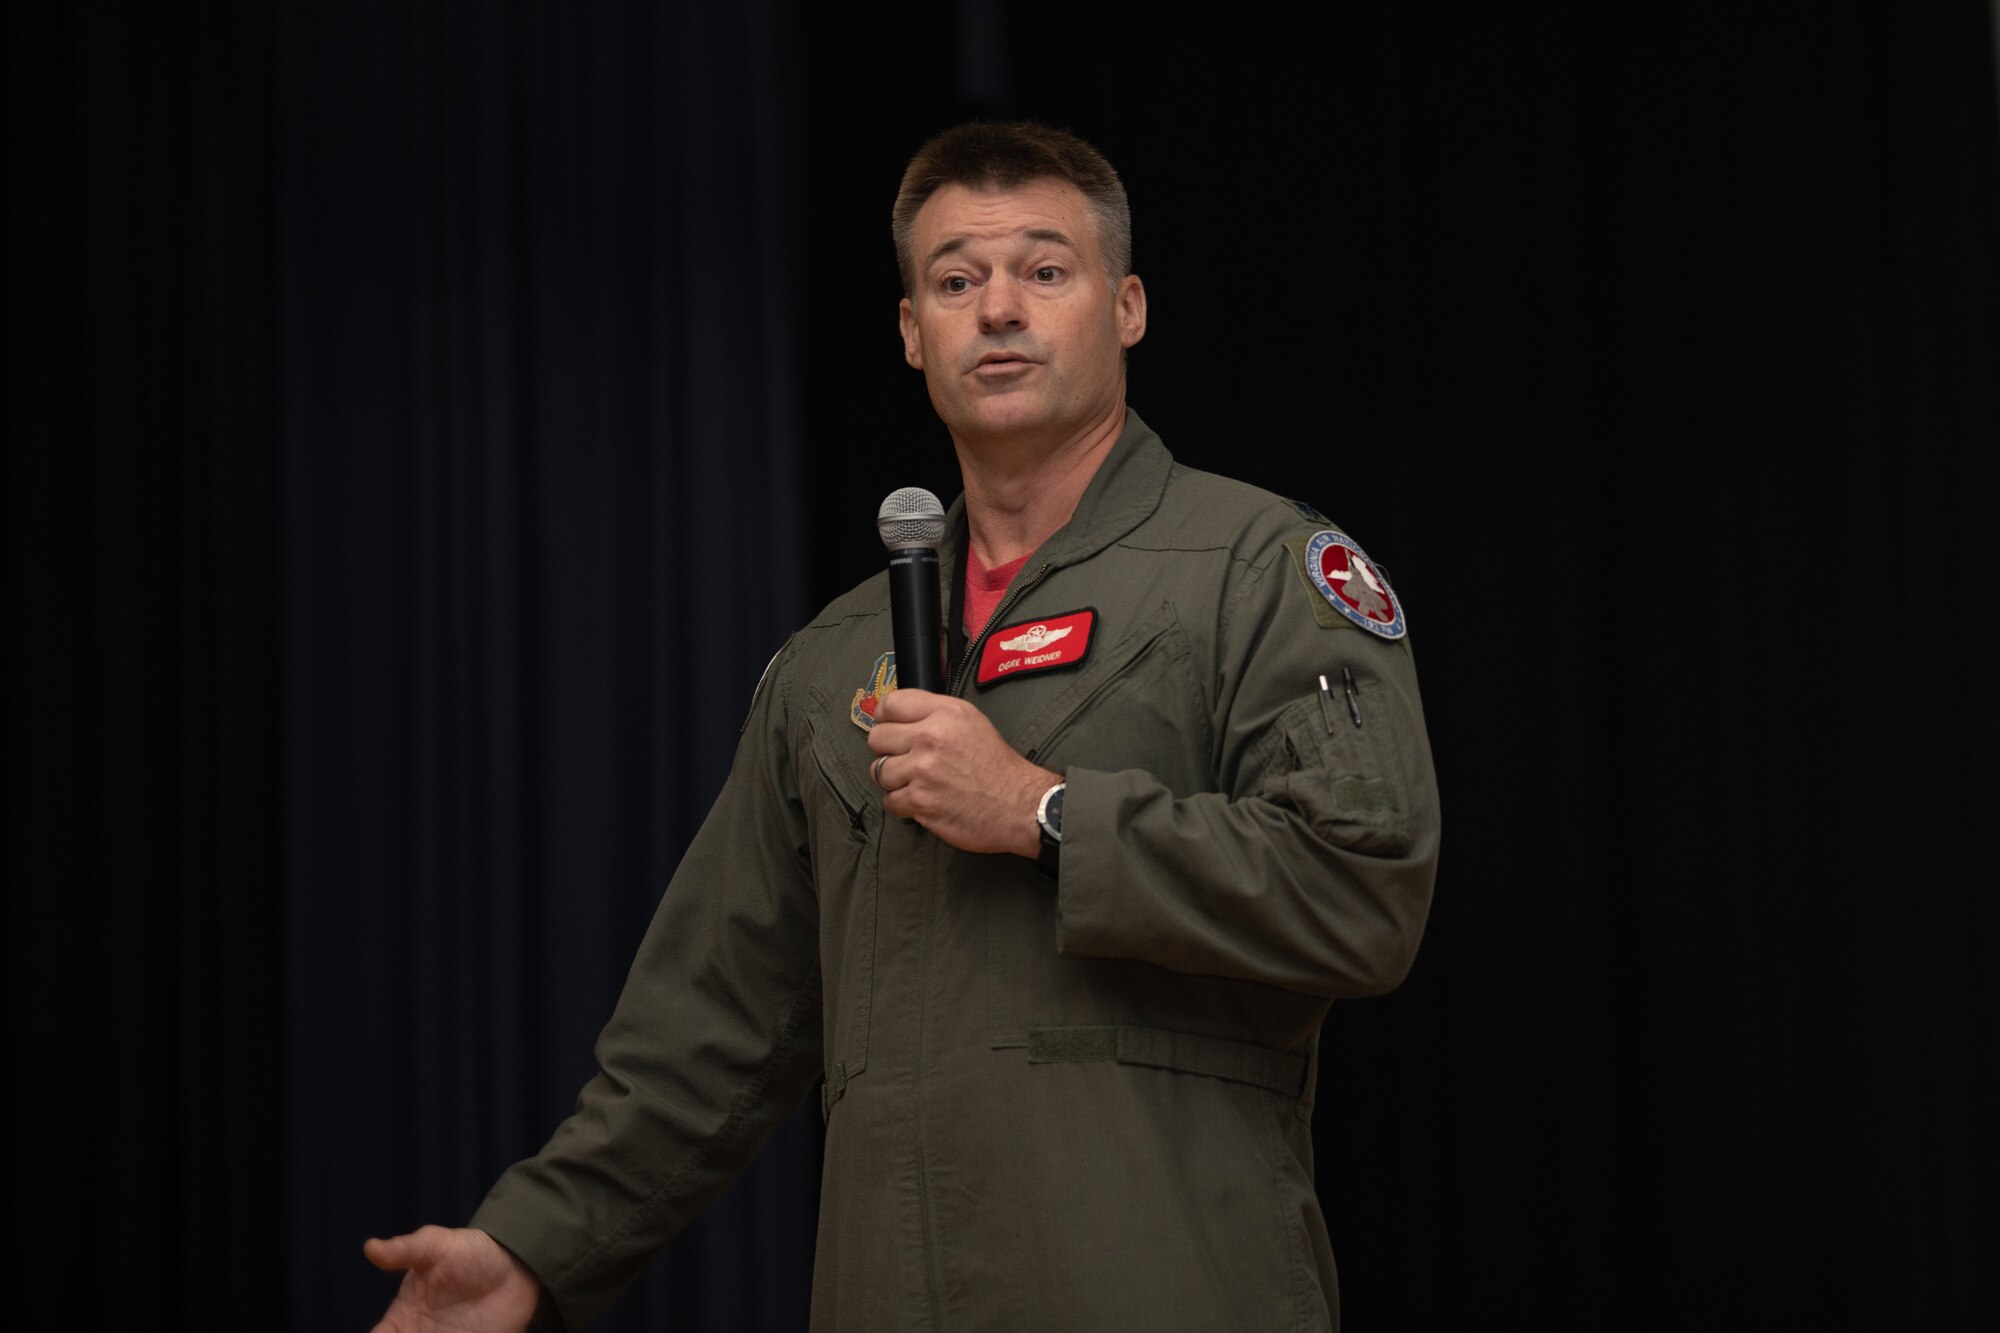 Lt. Col. Andrew Weidner, 192nd Operations Group deputy commander, speaks on stage.